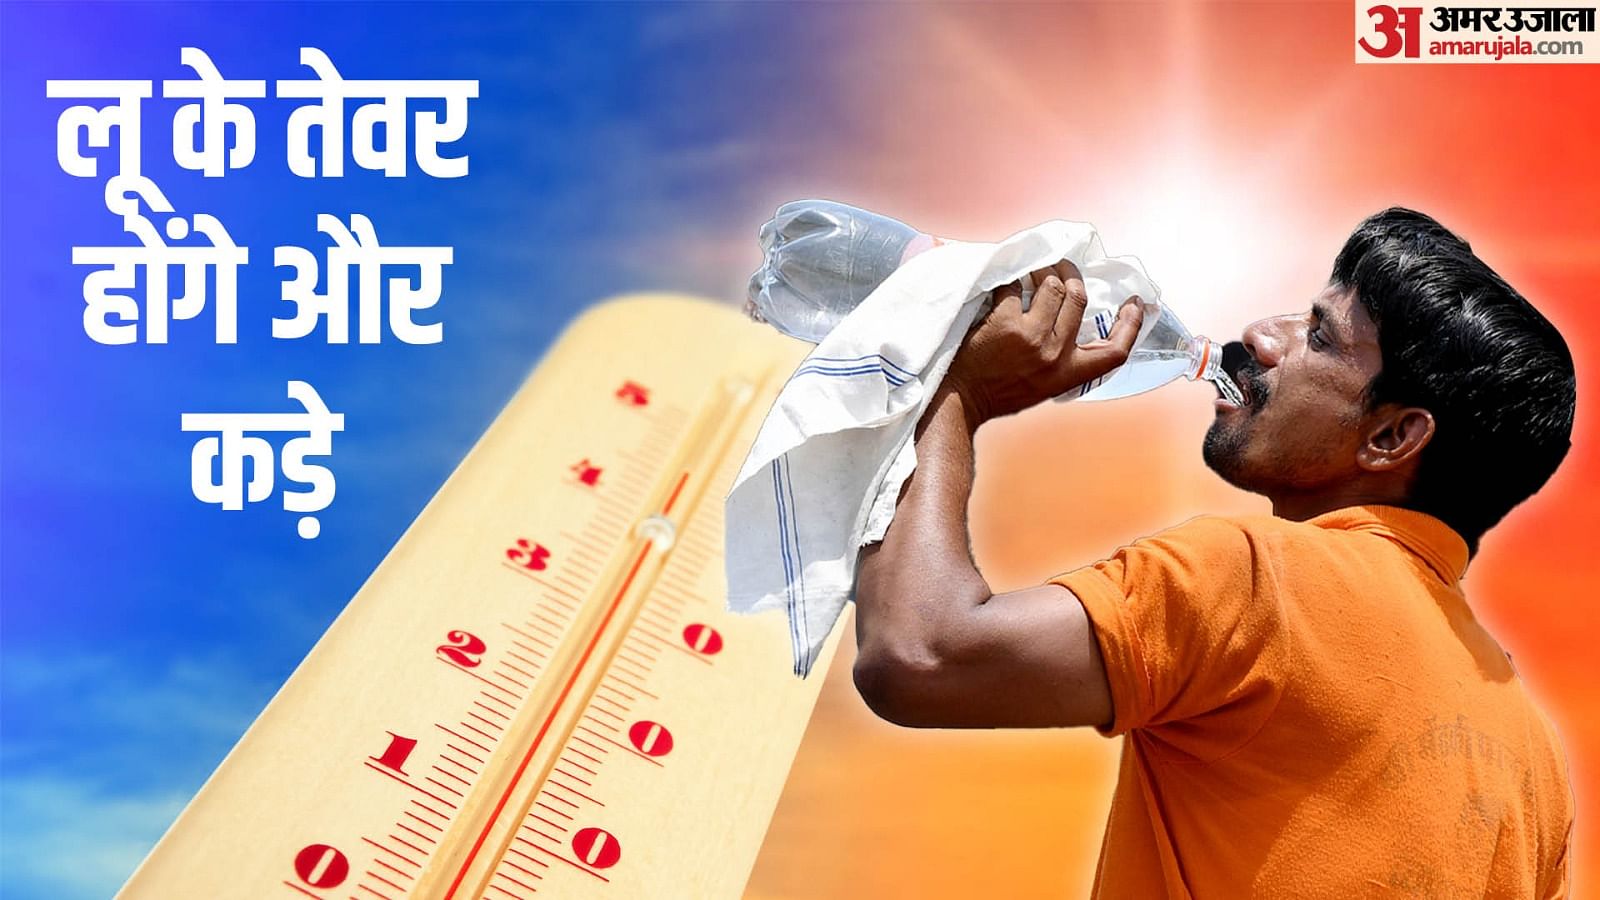 Heat wave bothered people in Delhi Heat wave alert from Sunday